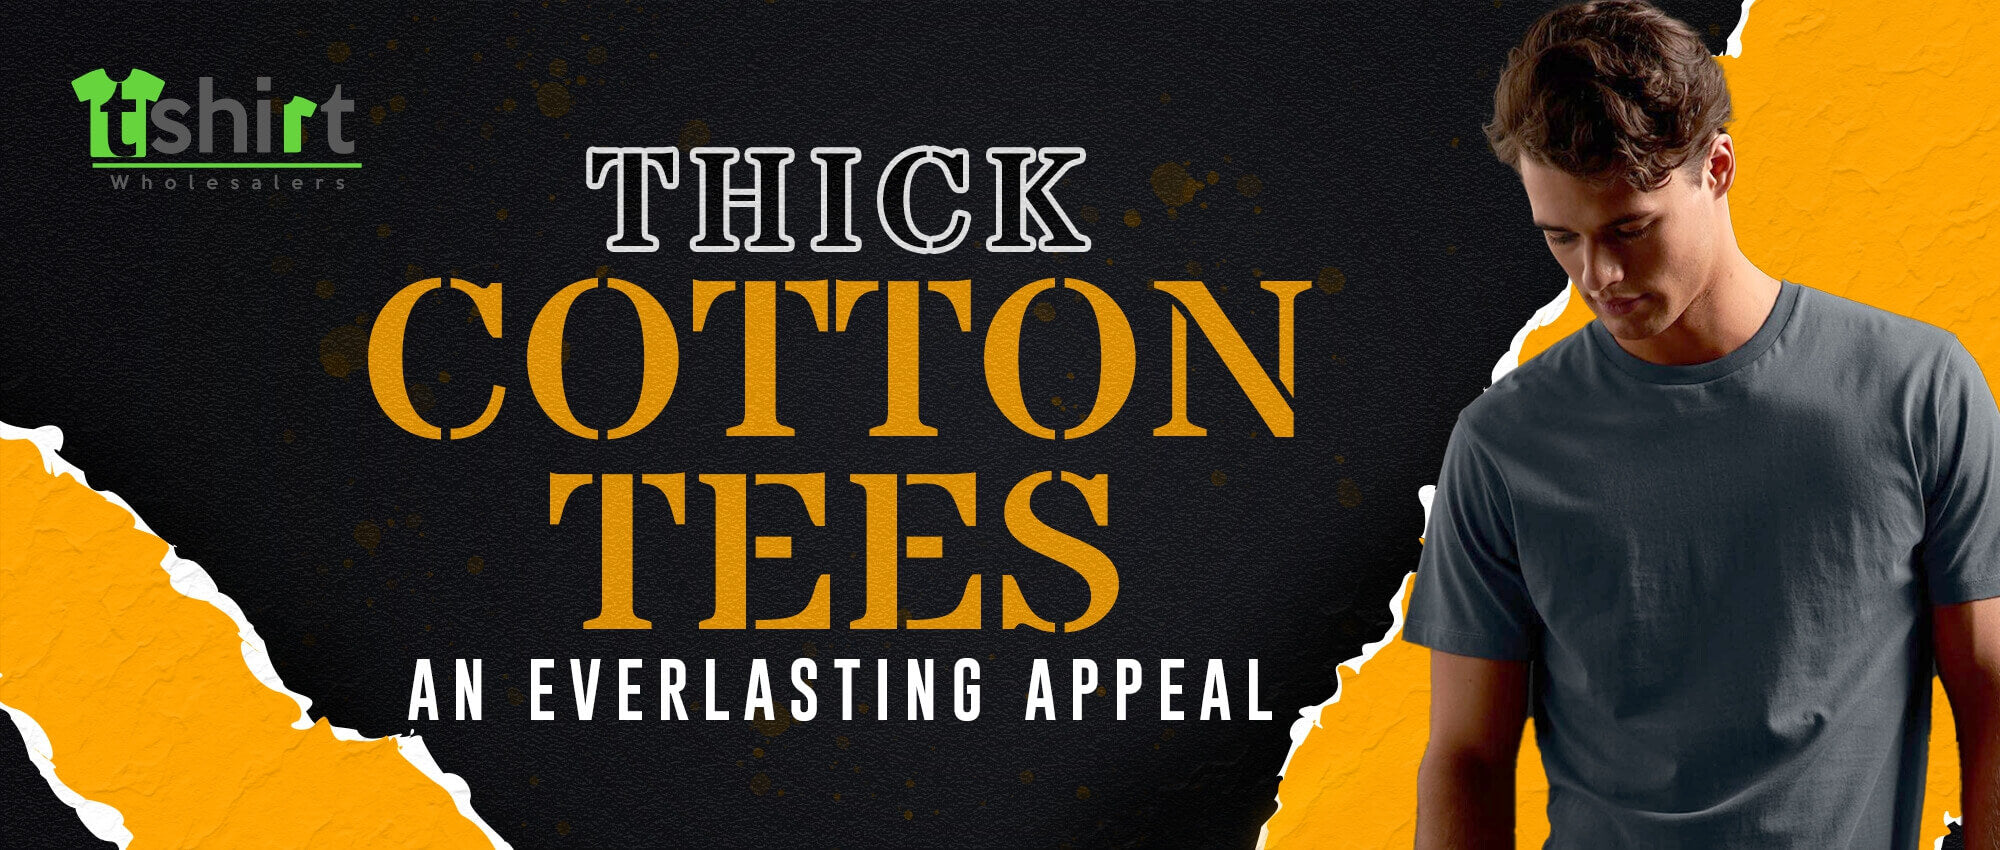 THICK COTTON TEES - AN EVERLASTING APPEAL